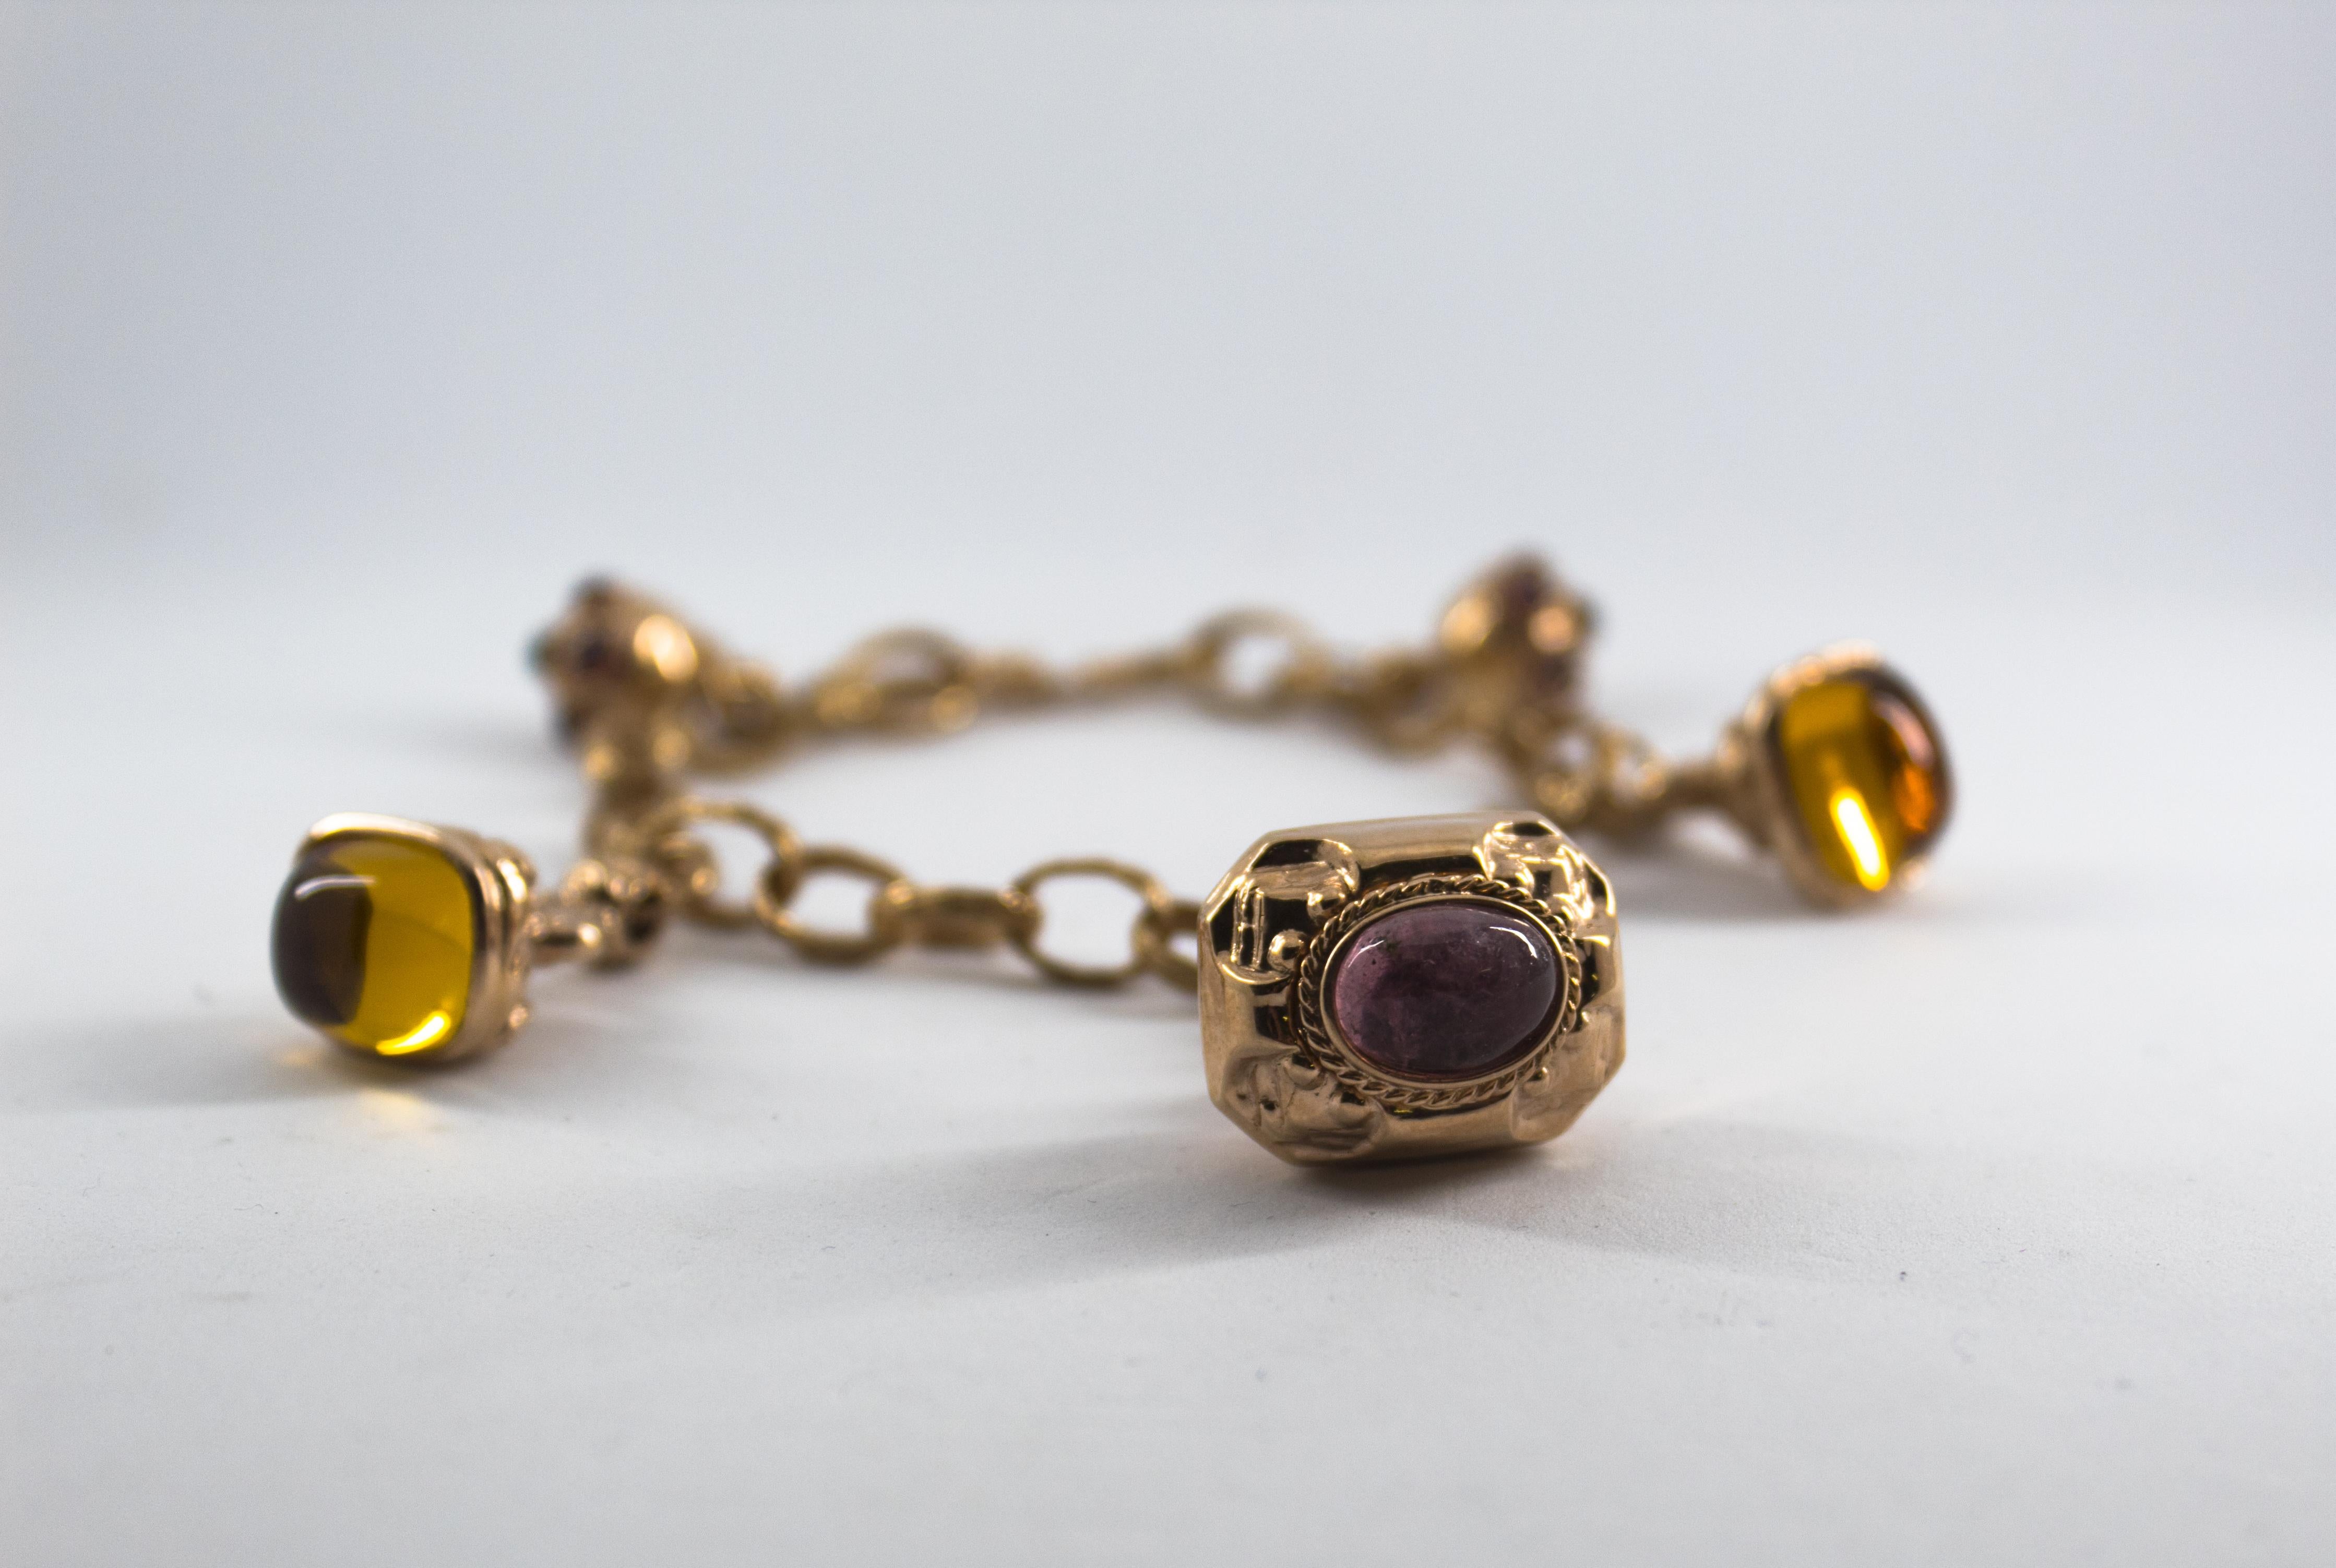 This Bracelet is made of 14K Yellow Gold.
This Bracelet has 0.35 Carats of Rubies.
This Bracelet has 16.00 Carats of Citrine.
This Bracelet has 8.00 Carat of Tourmaline.
We're a workshop so every piece is handmade, customizable and resizable.